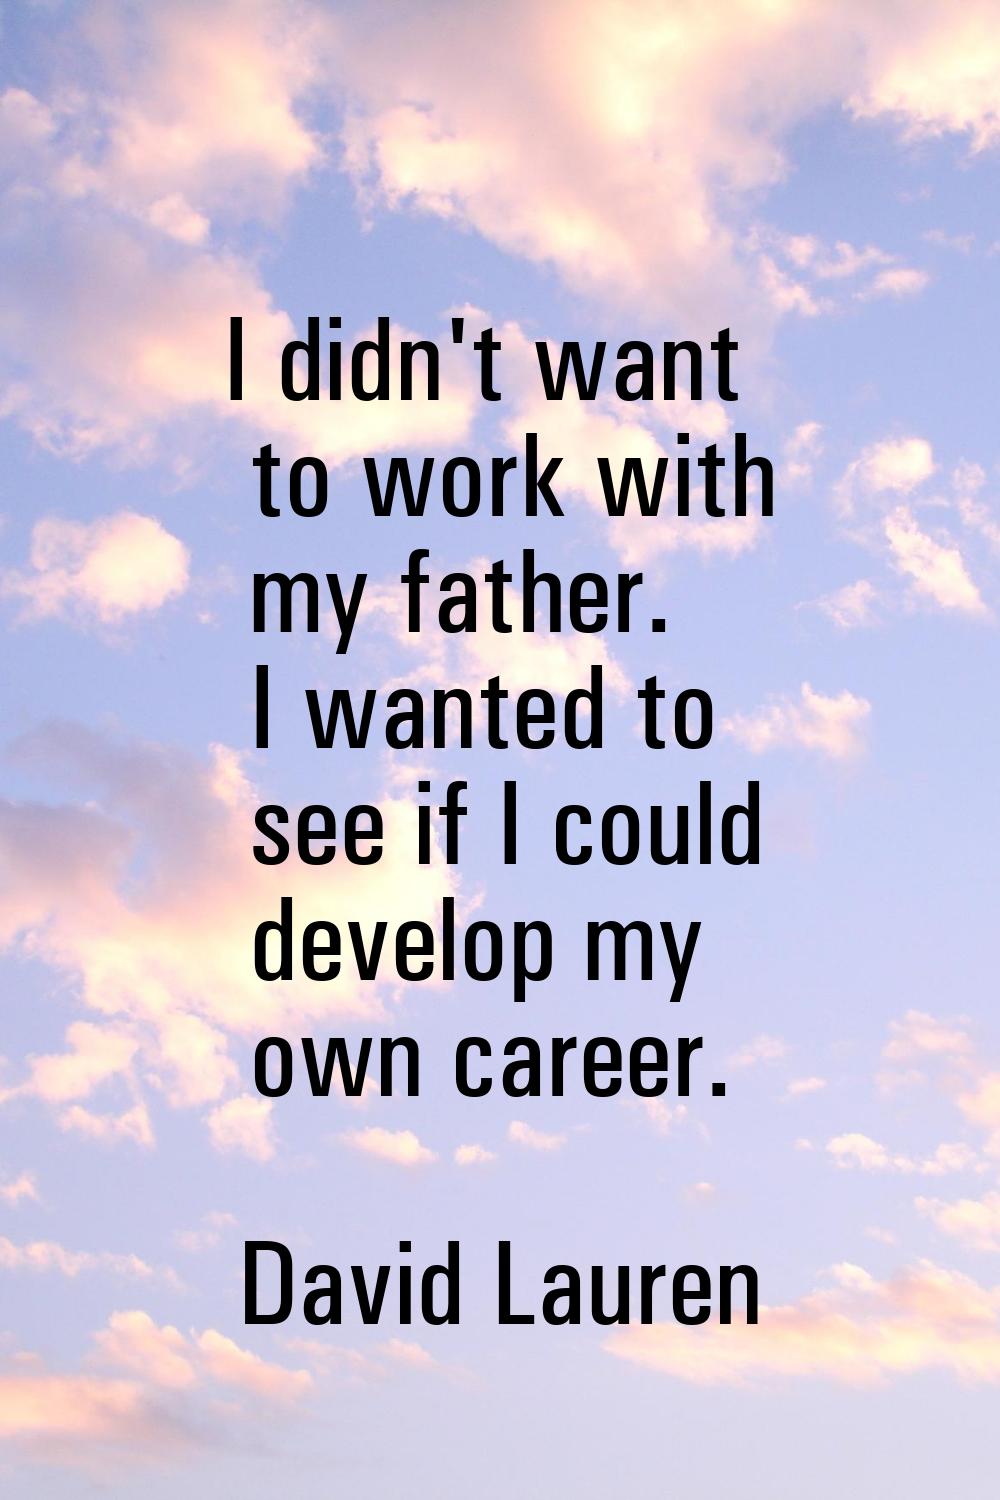 I didn't want to work with my father. I wanted to see if I could develop my own career.